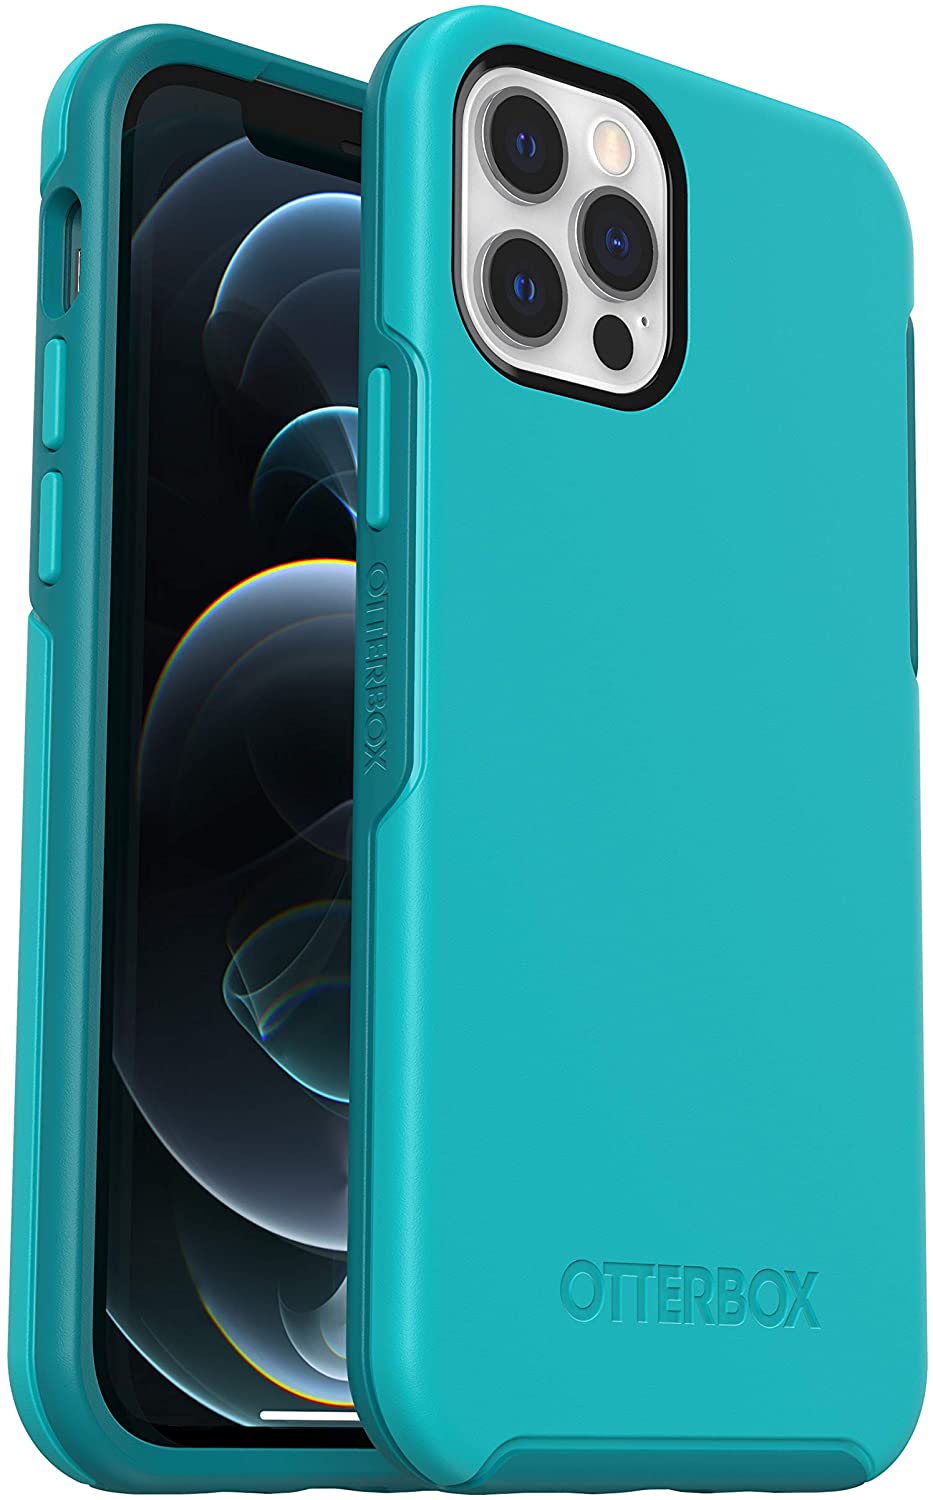 OtterBox SYMMETRY SERIES Case for iPhone 12 / iPhone 12 Pro - Rock Candy Blue